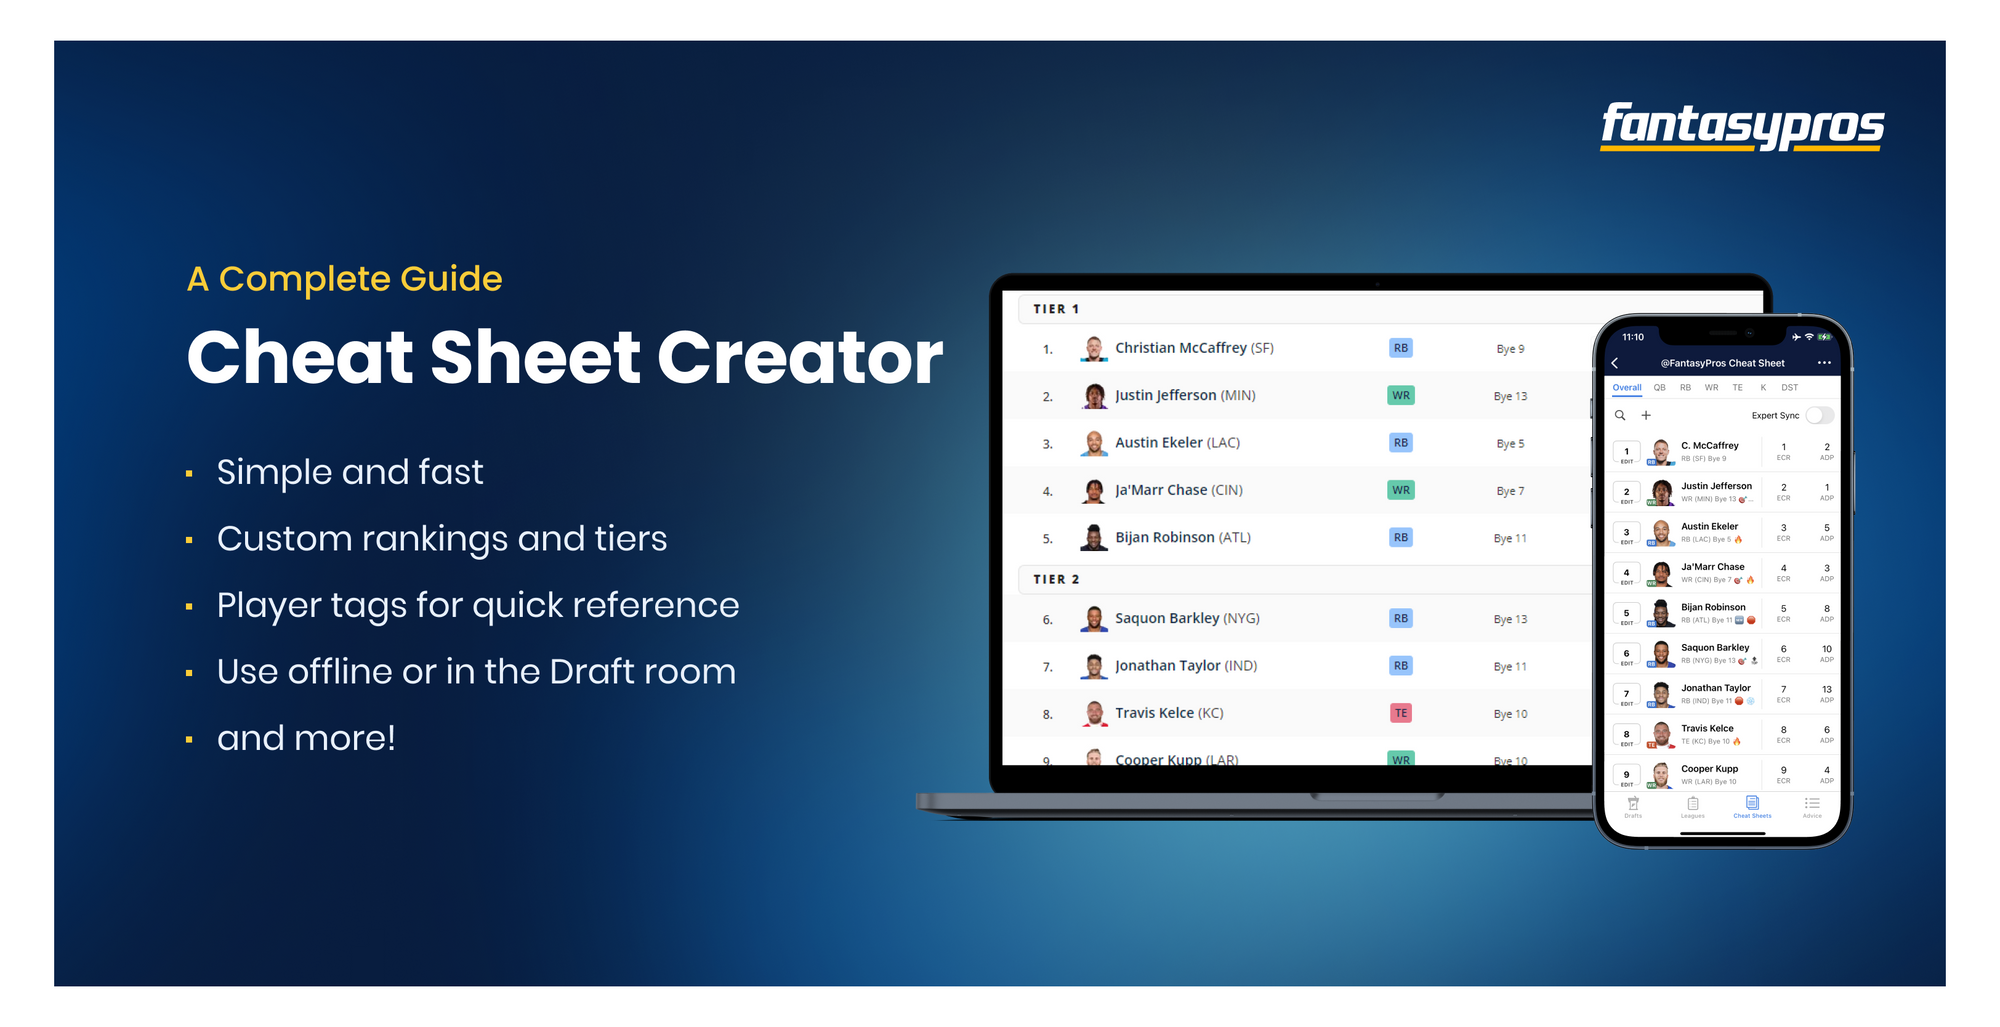 How to make the most of the FantasyPros Cheat Sheet Creator